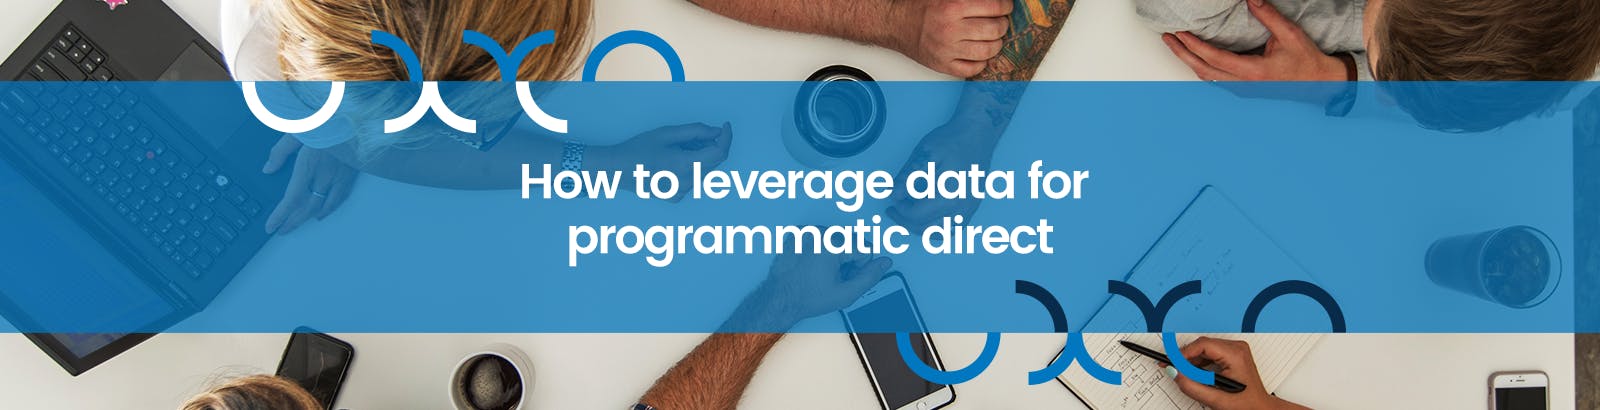 ProgrammaticGuide Hero fixed - How to Leverage Data for Programmatic Direct: Types of Targeting Data